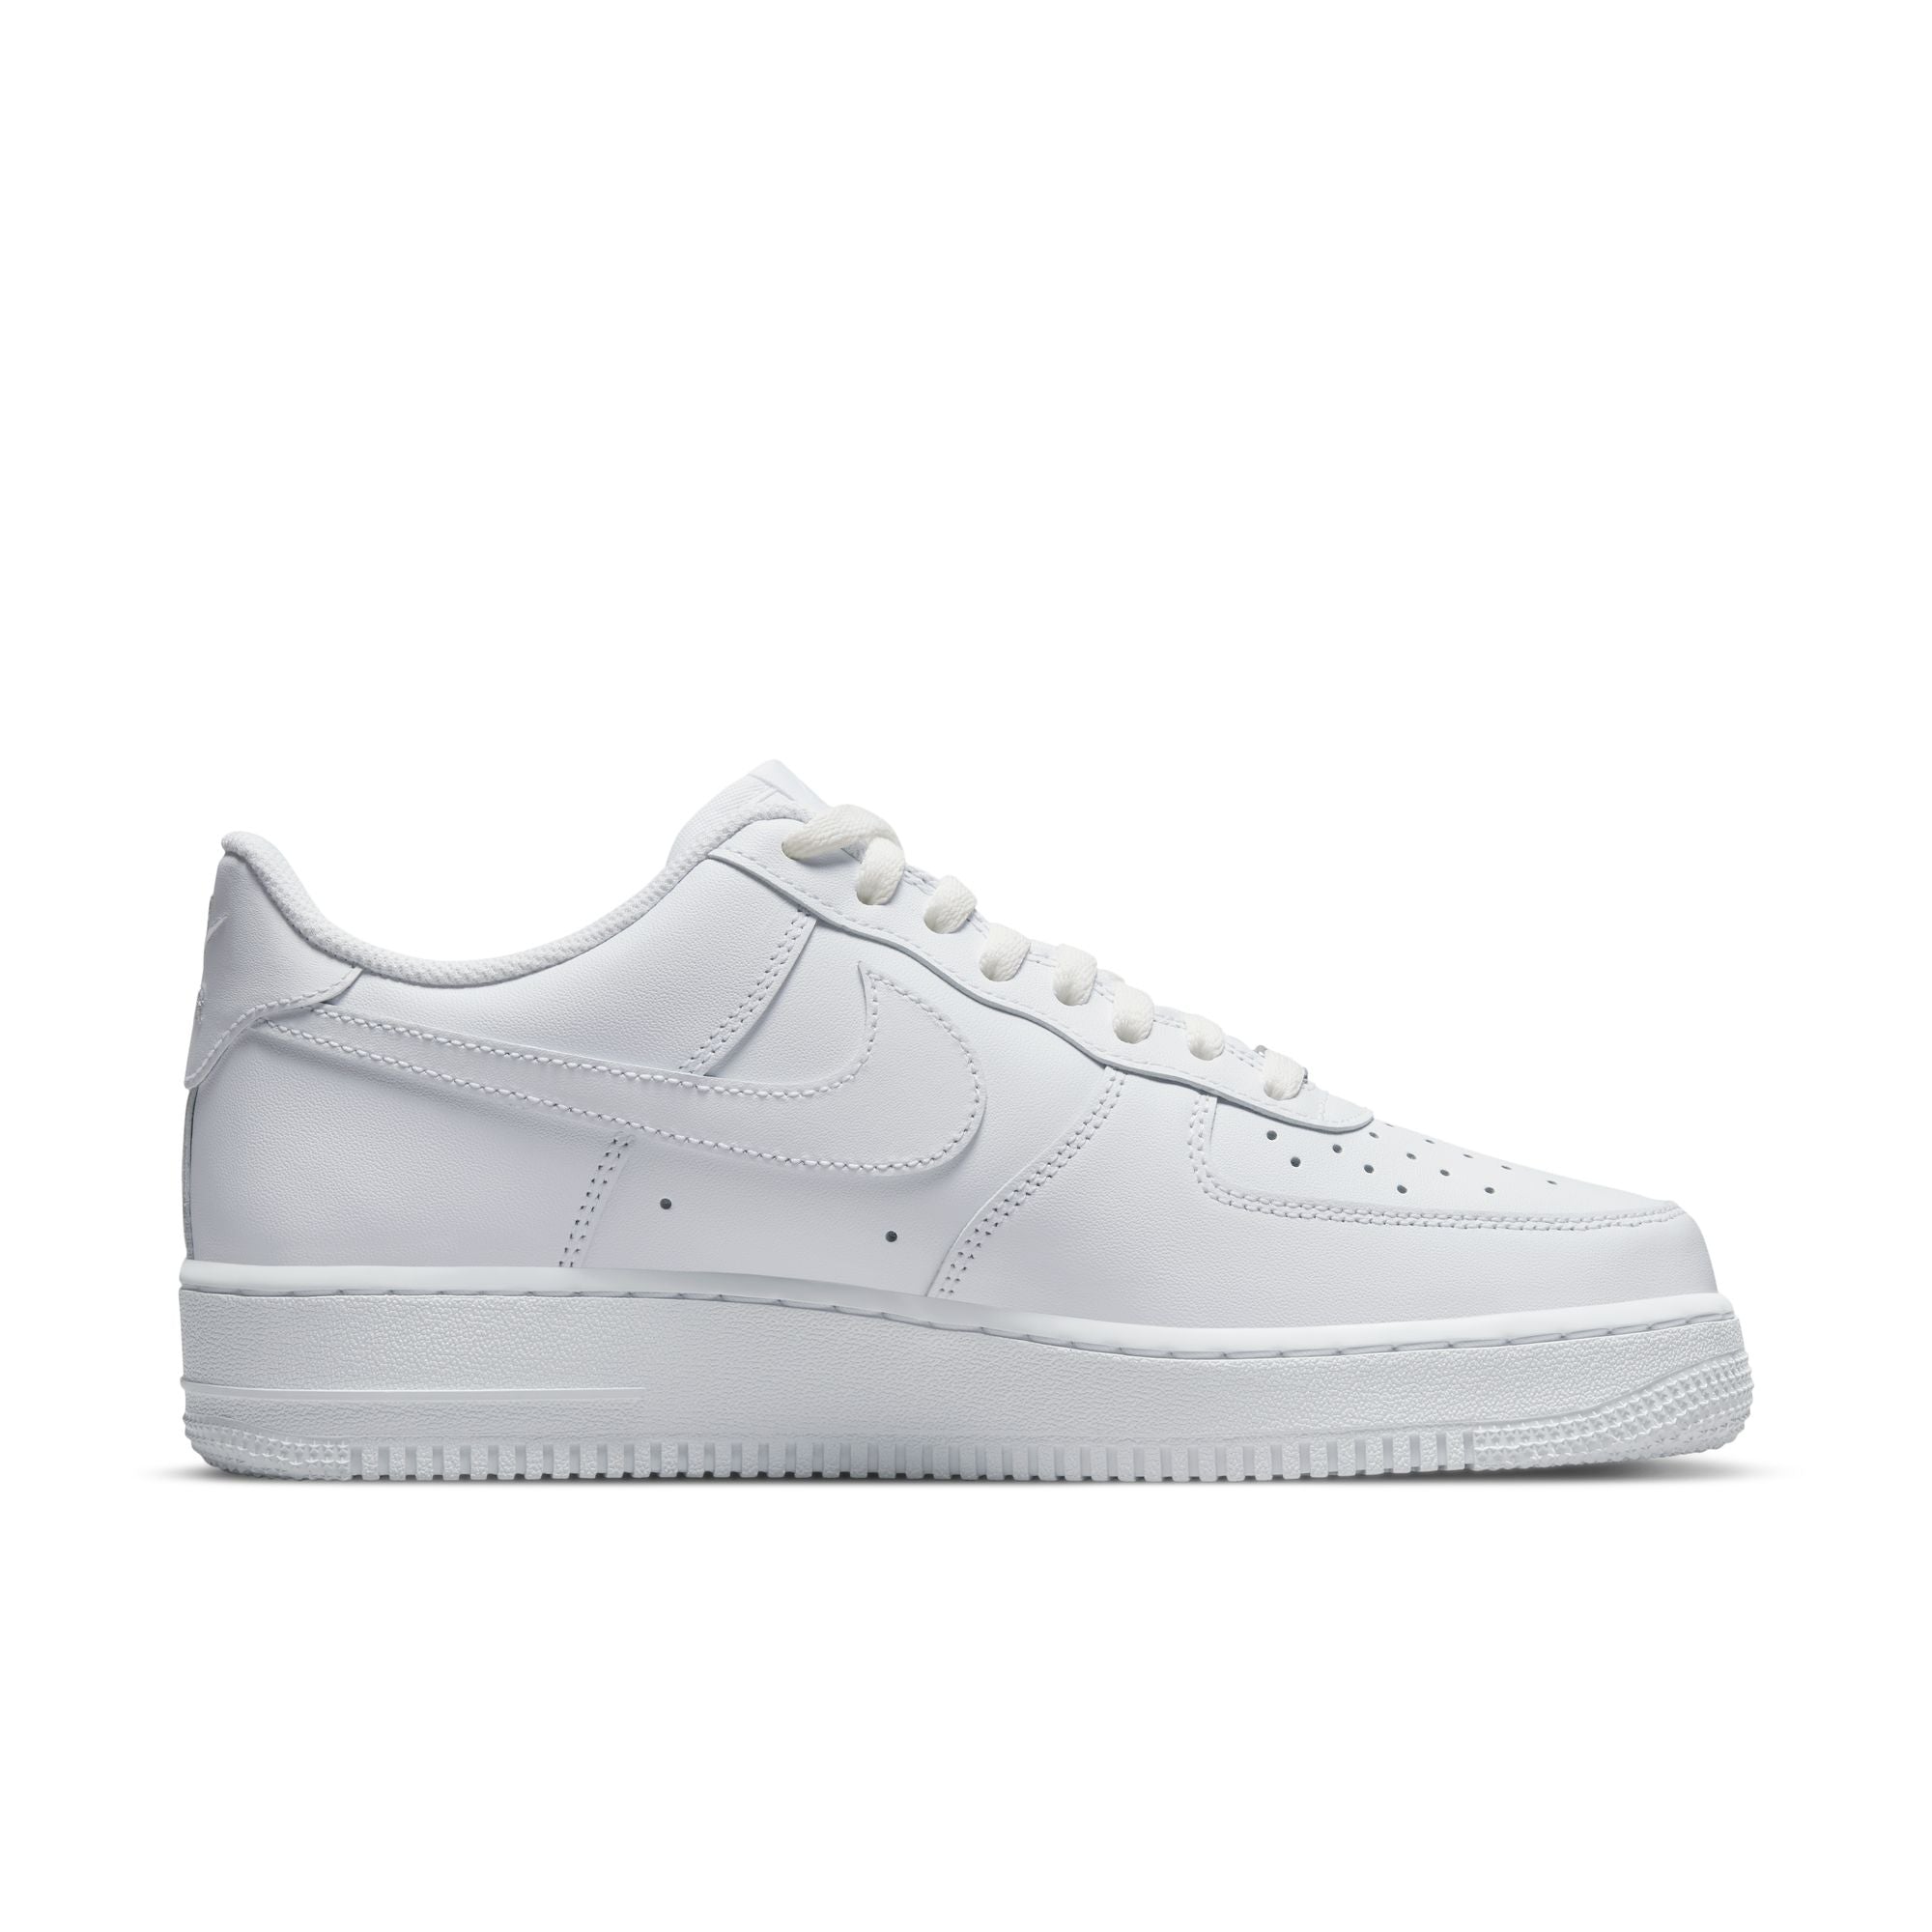 Nike Air Force 1 '07 Low - SoleFly